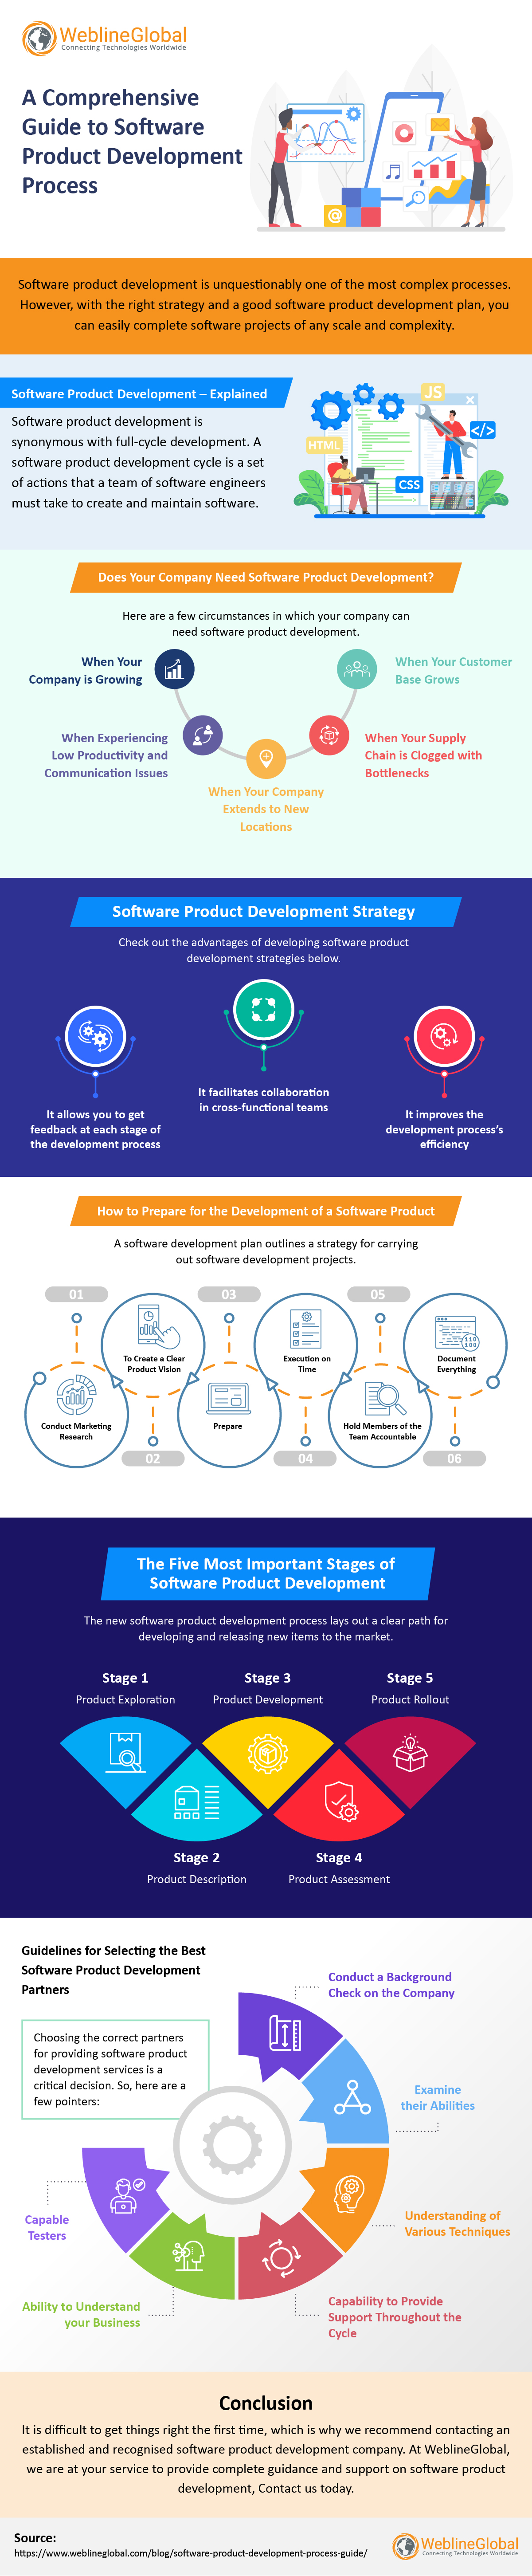 Software Product Development Process Infographic